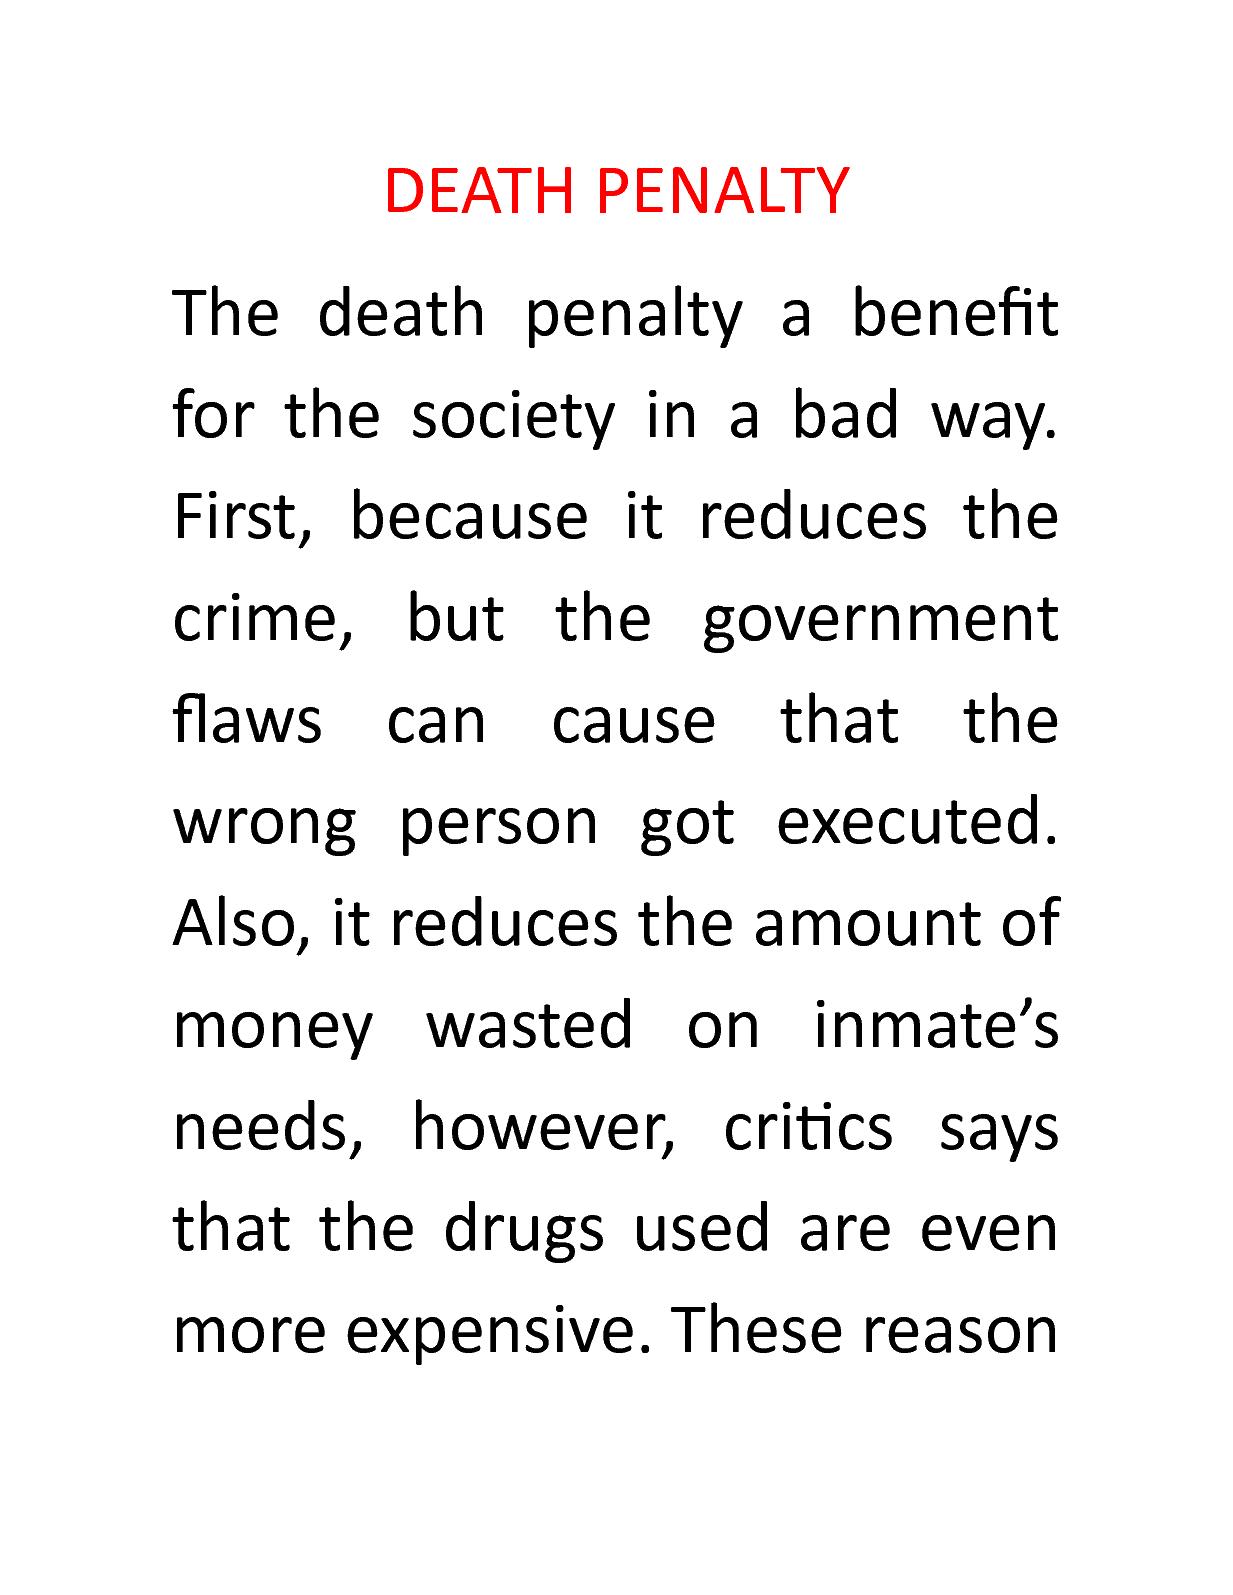 Essay about death penalty